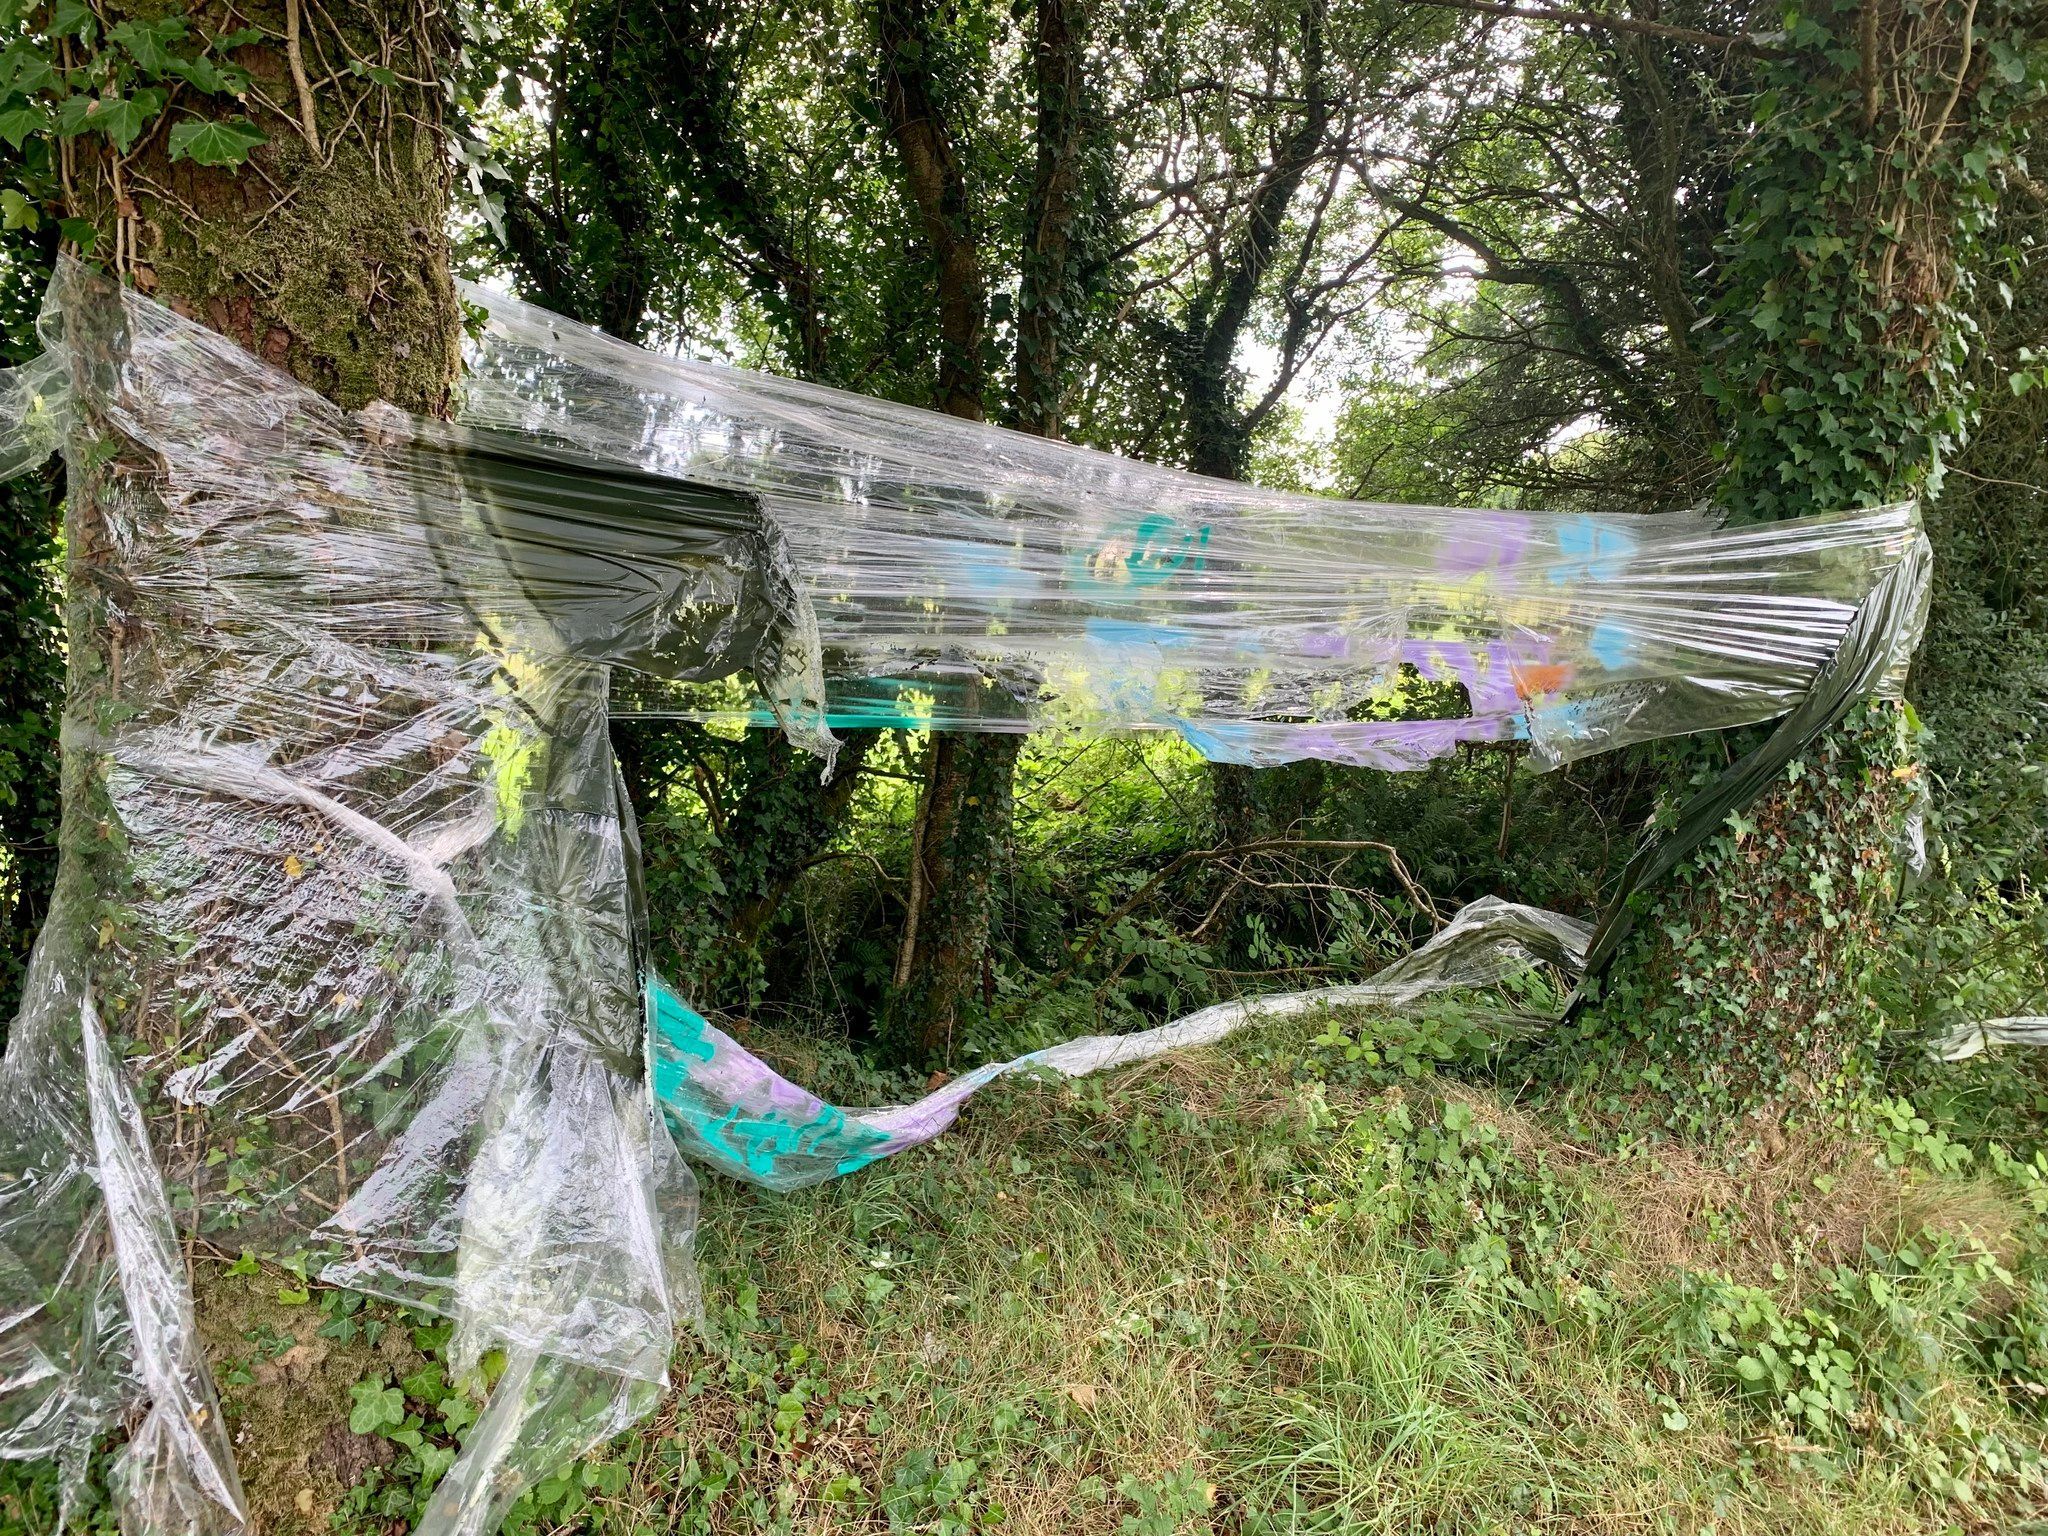 Artworks which formed part of the Sliabh Beagh Arts trail were vandalised over the weekend.